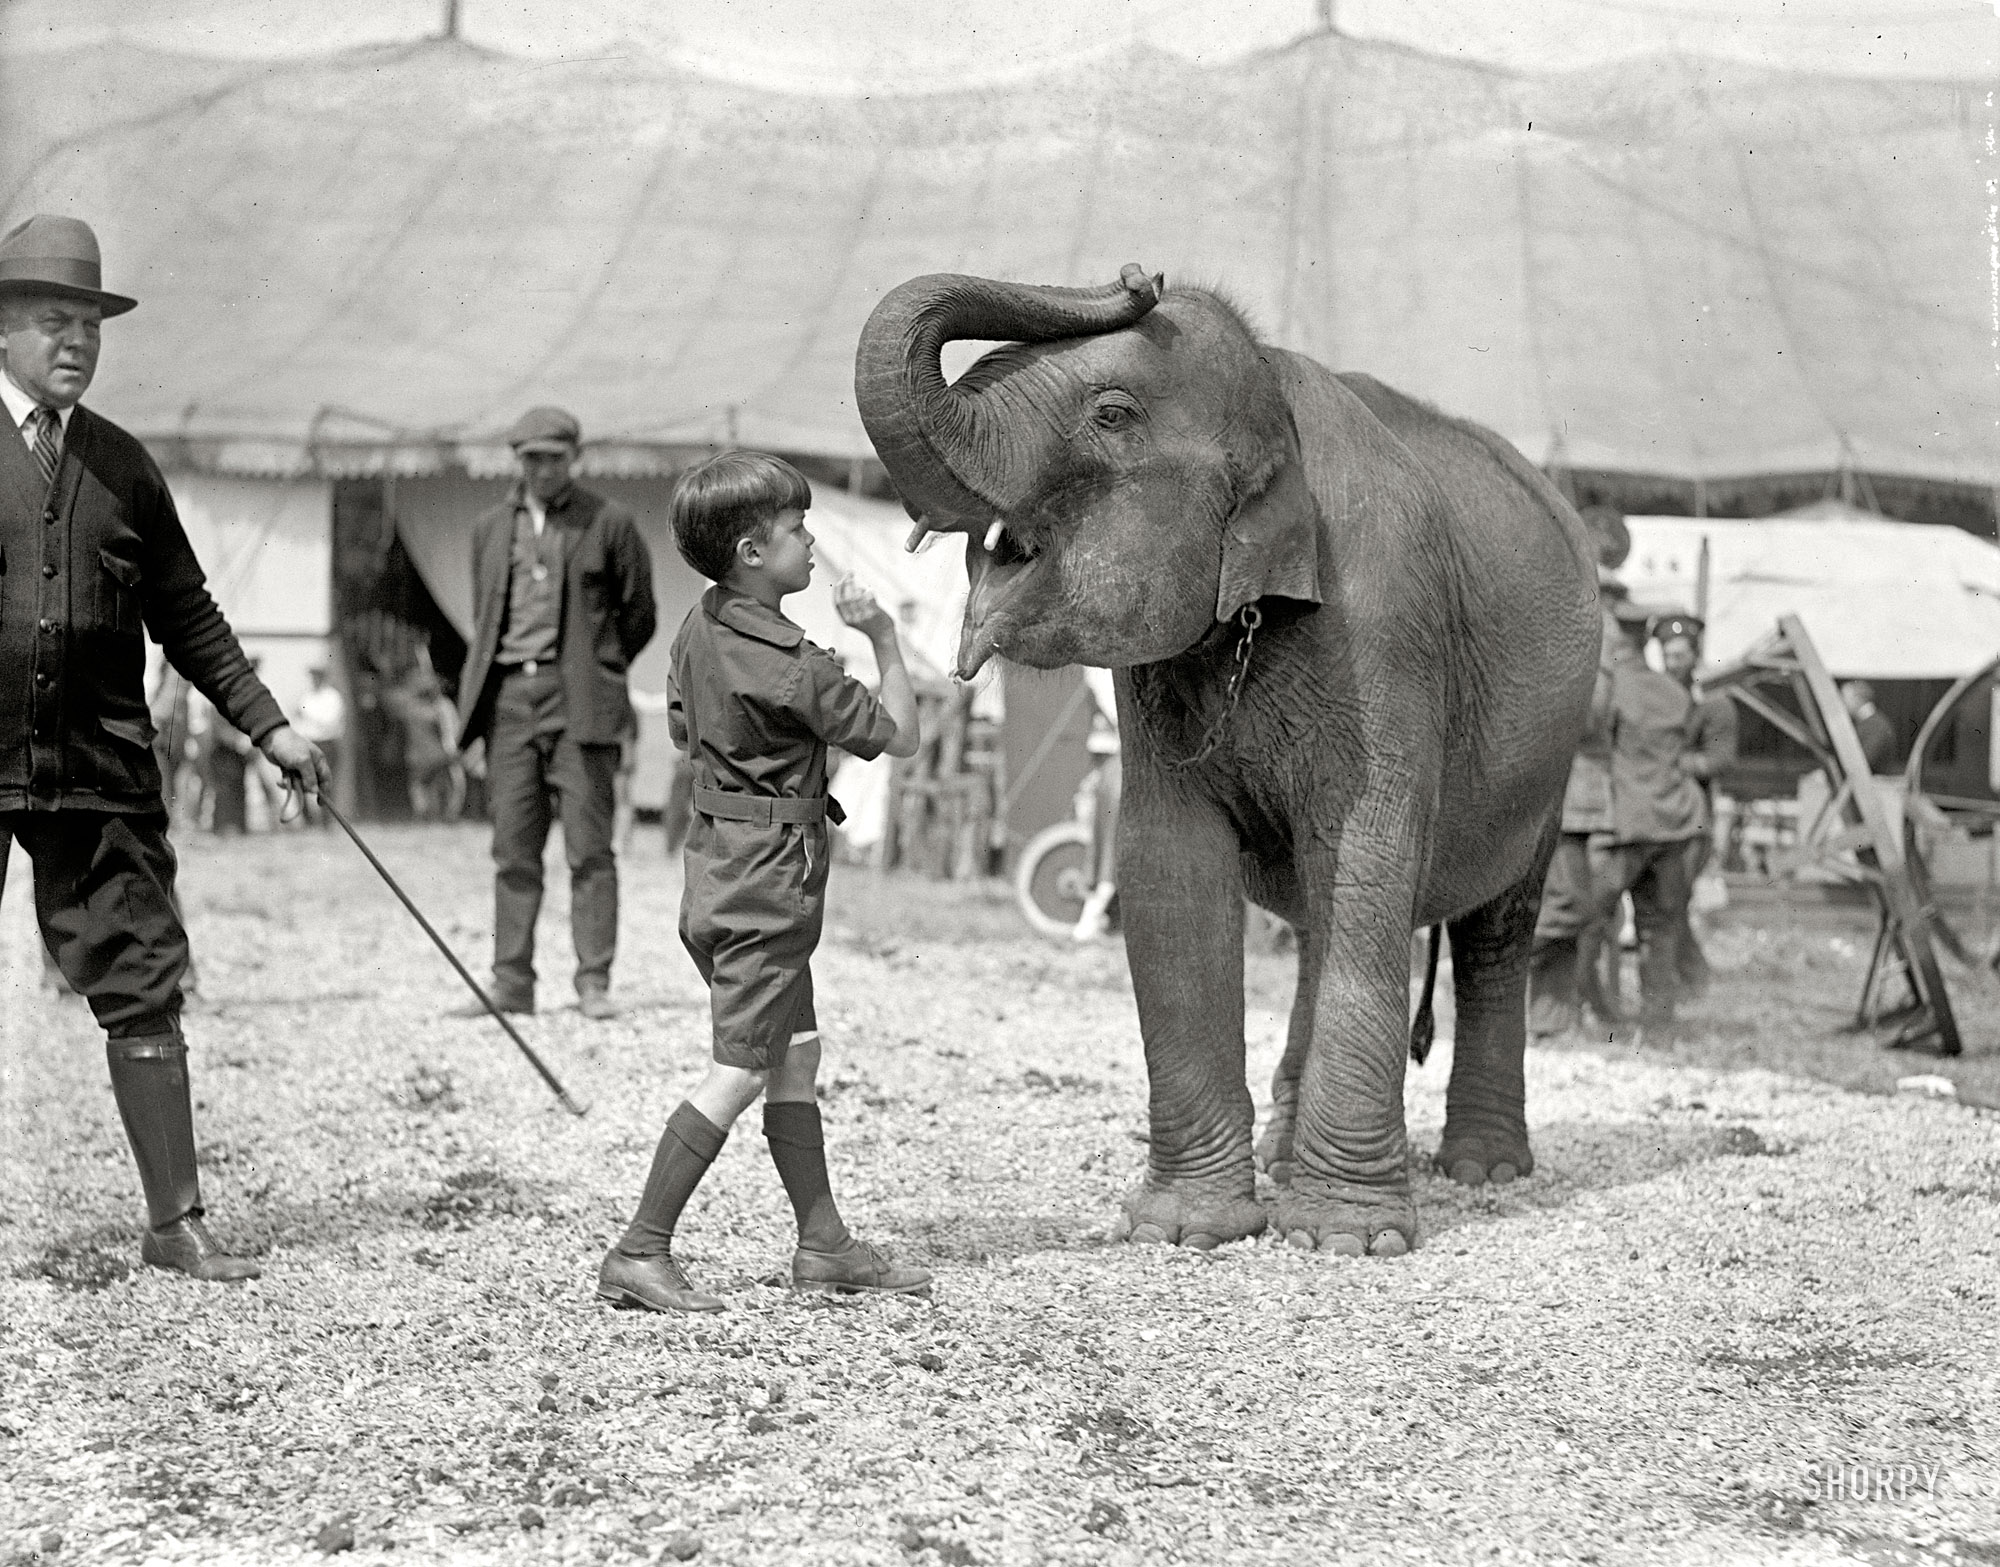 May 13, 1924. Washington, D.C. "Teddy Roosevelt 3d at circus." Last seen in our previous post as a budding boxer.  National Photo Co. View full size.